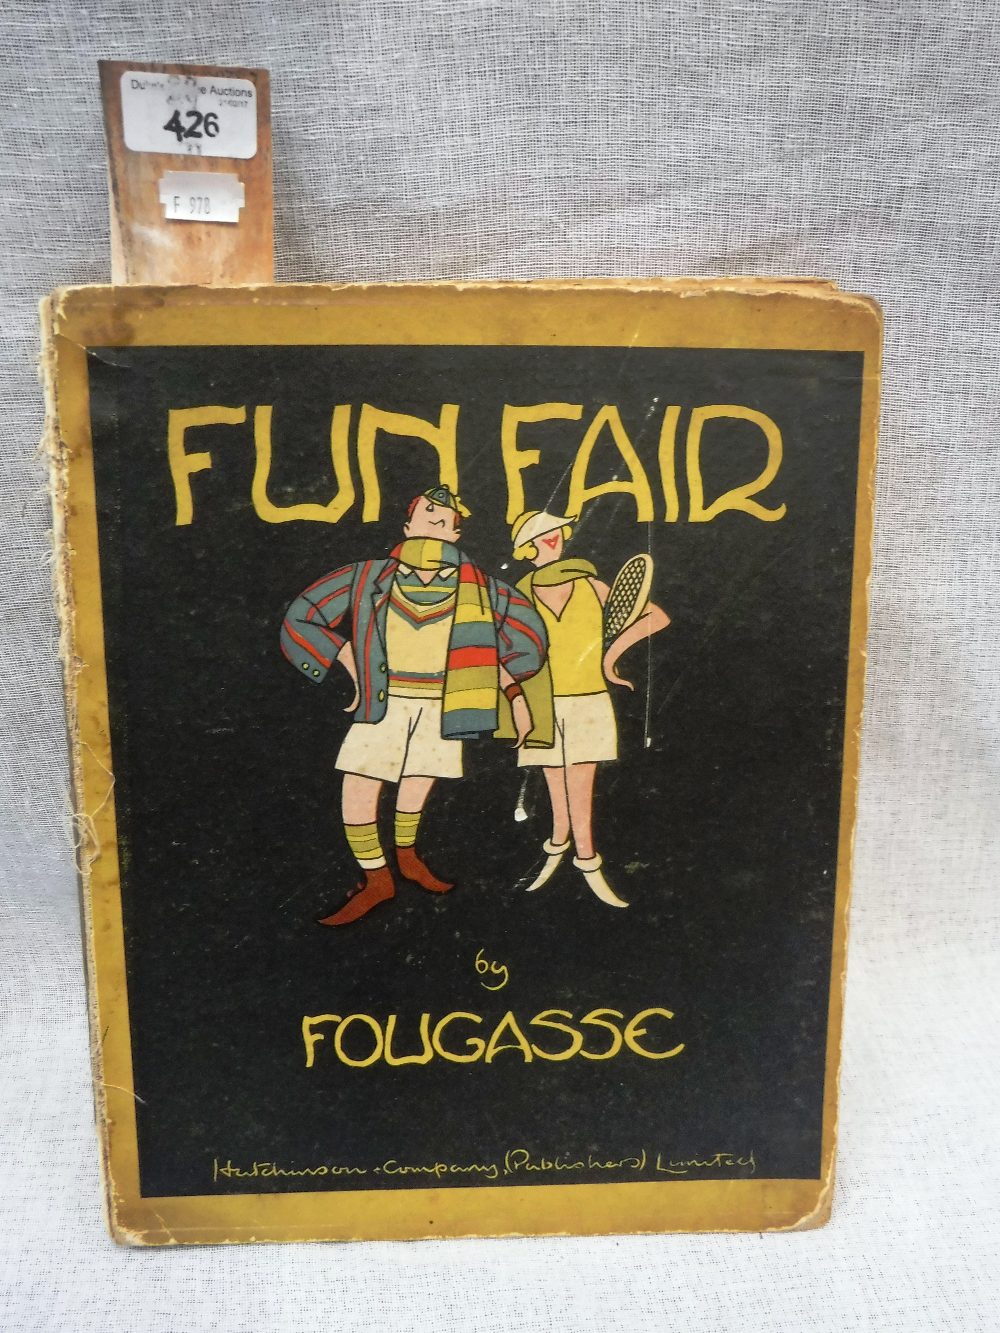 'FUN FAIR, A book of collected drawings by Fougasse', pub. Hutchinson & Co, 1934